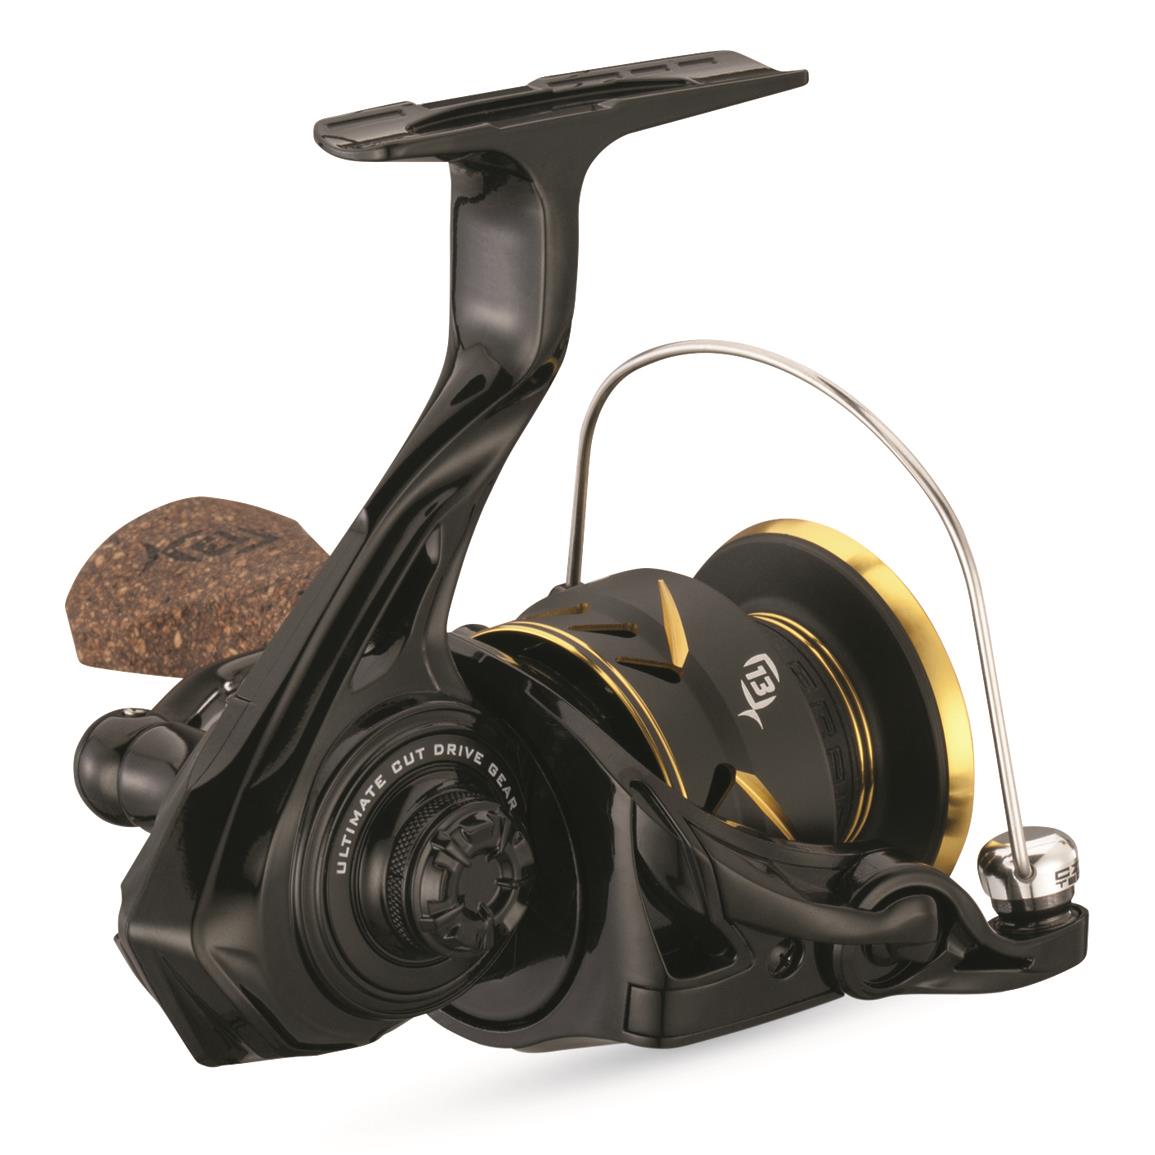 Shimano Nexave FI Spinning Reel, 5.8:1 Gear Ratio, 4000 Size Reel - 725610,  Spinning Reels at Sportsman's Guide